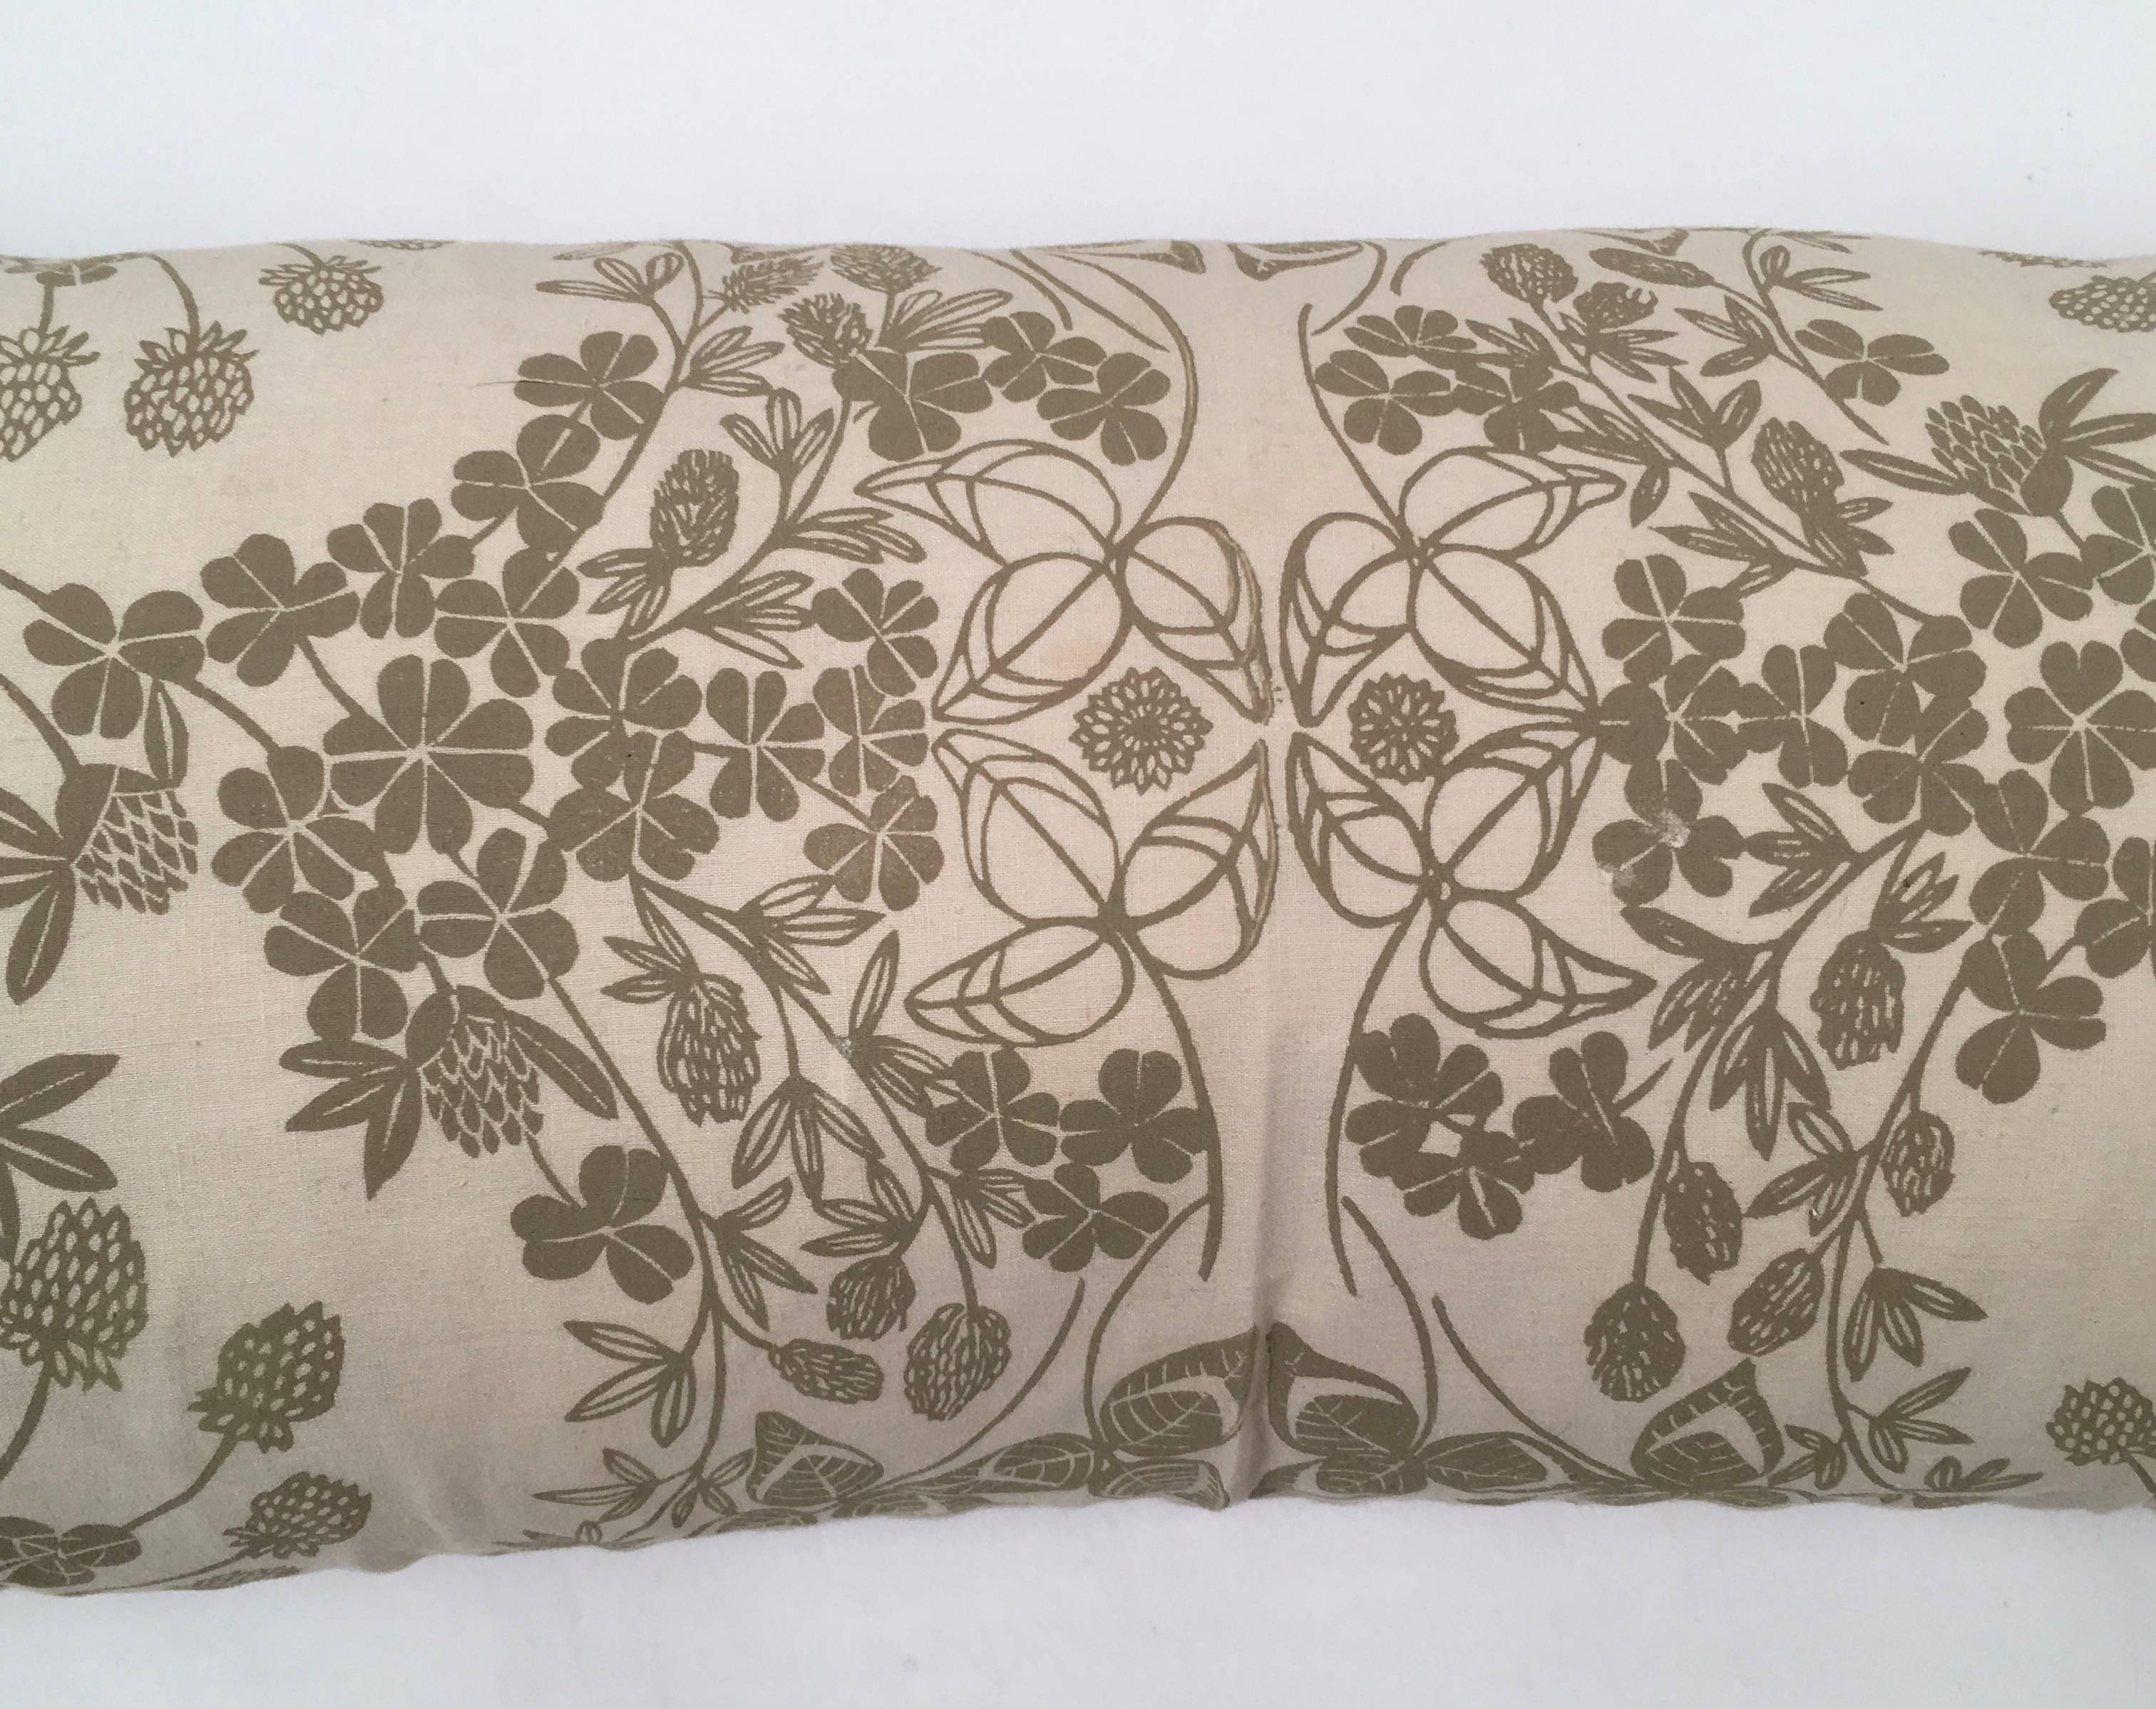 Hand-Crafted Folly Cove Designers Hand Block Printed Clover Pillow